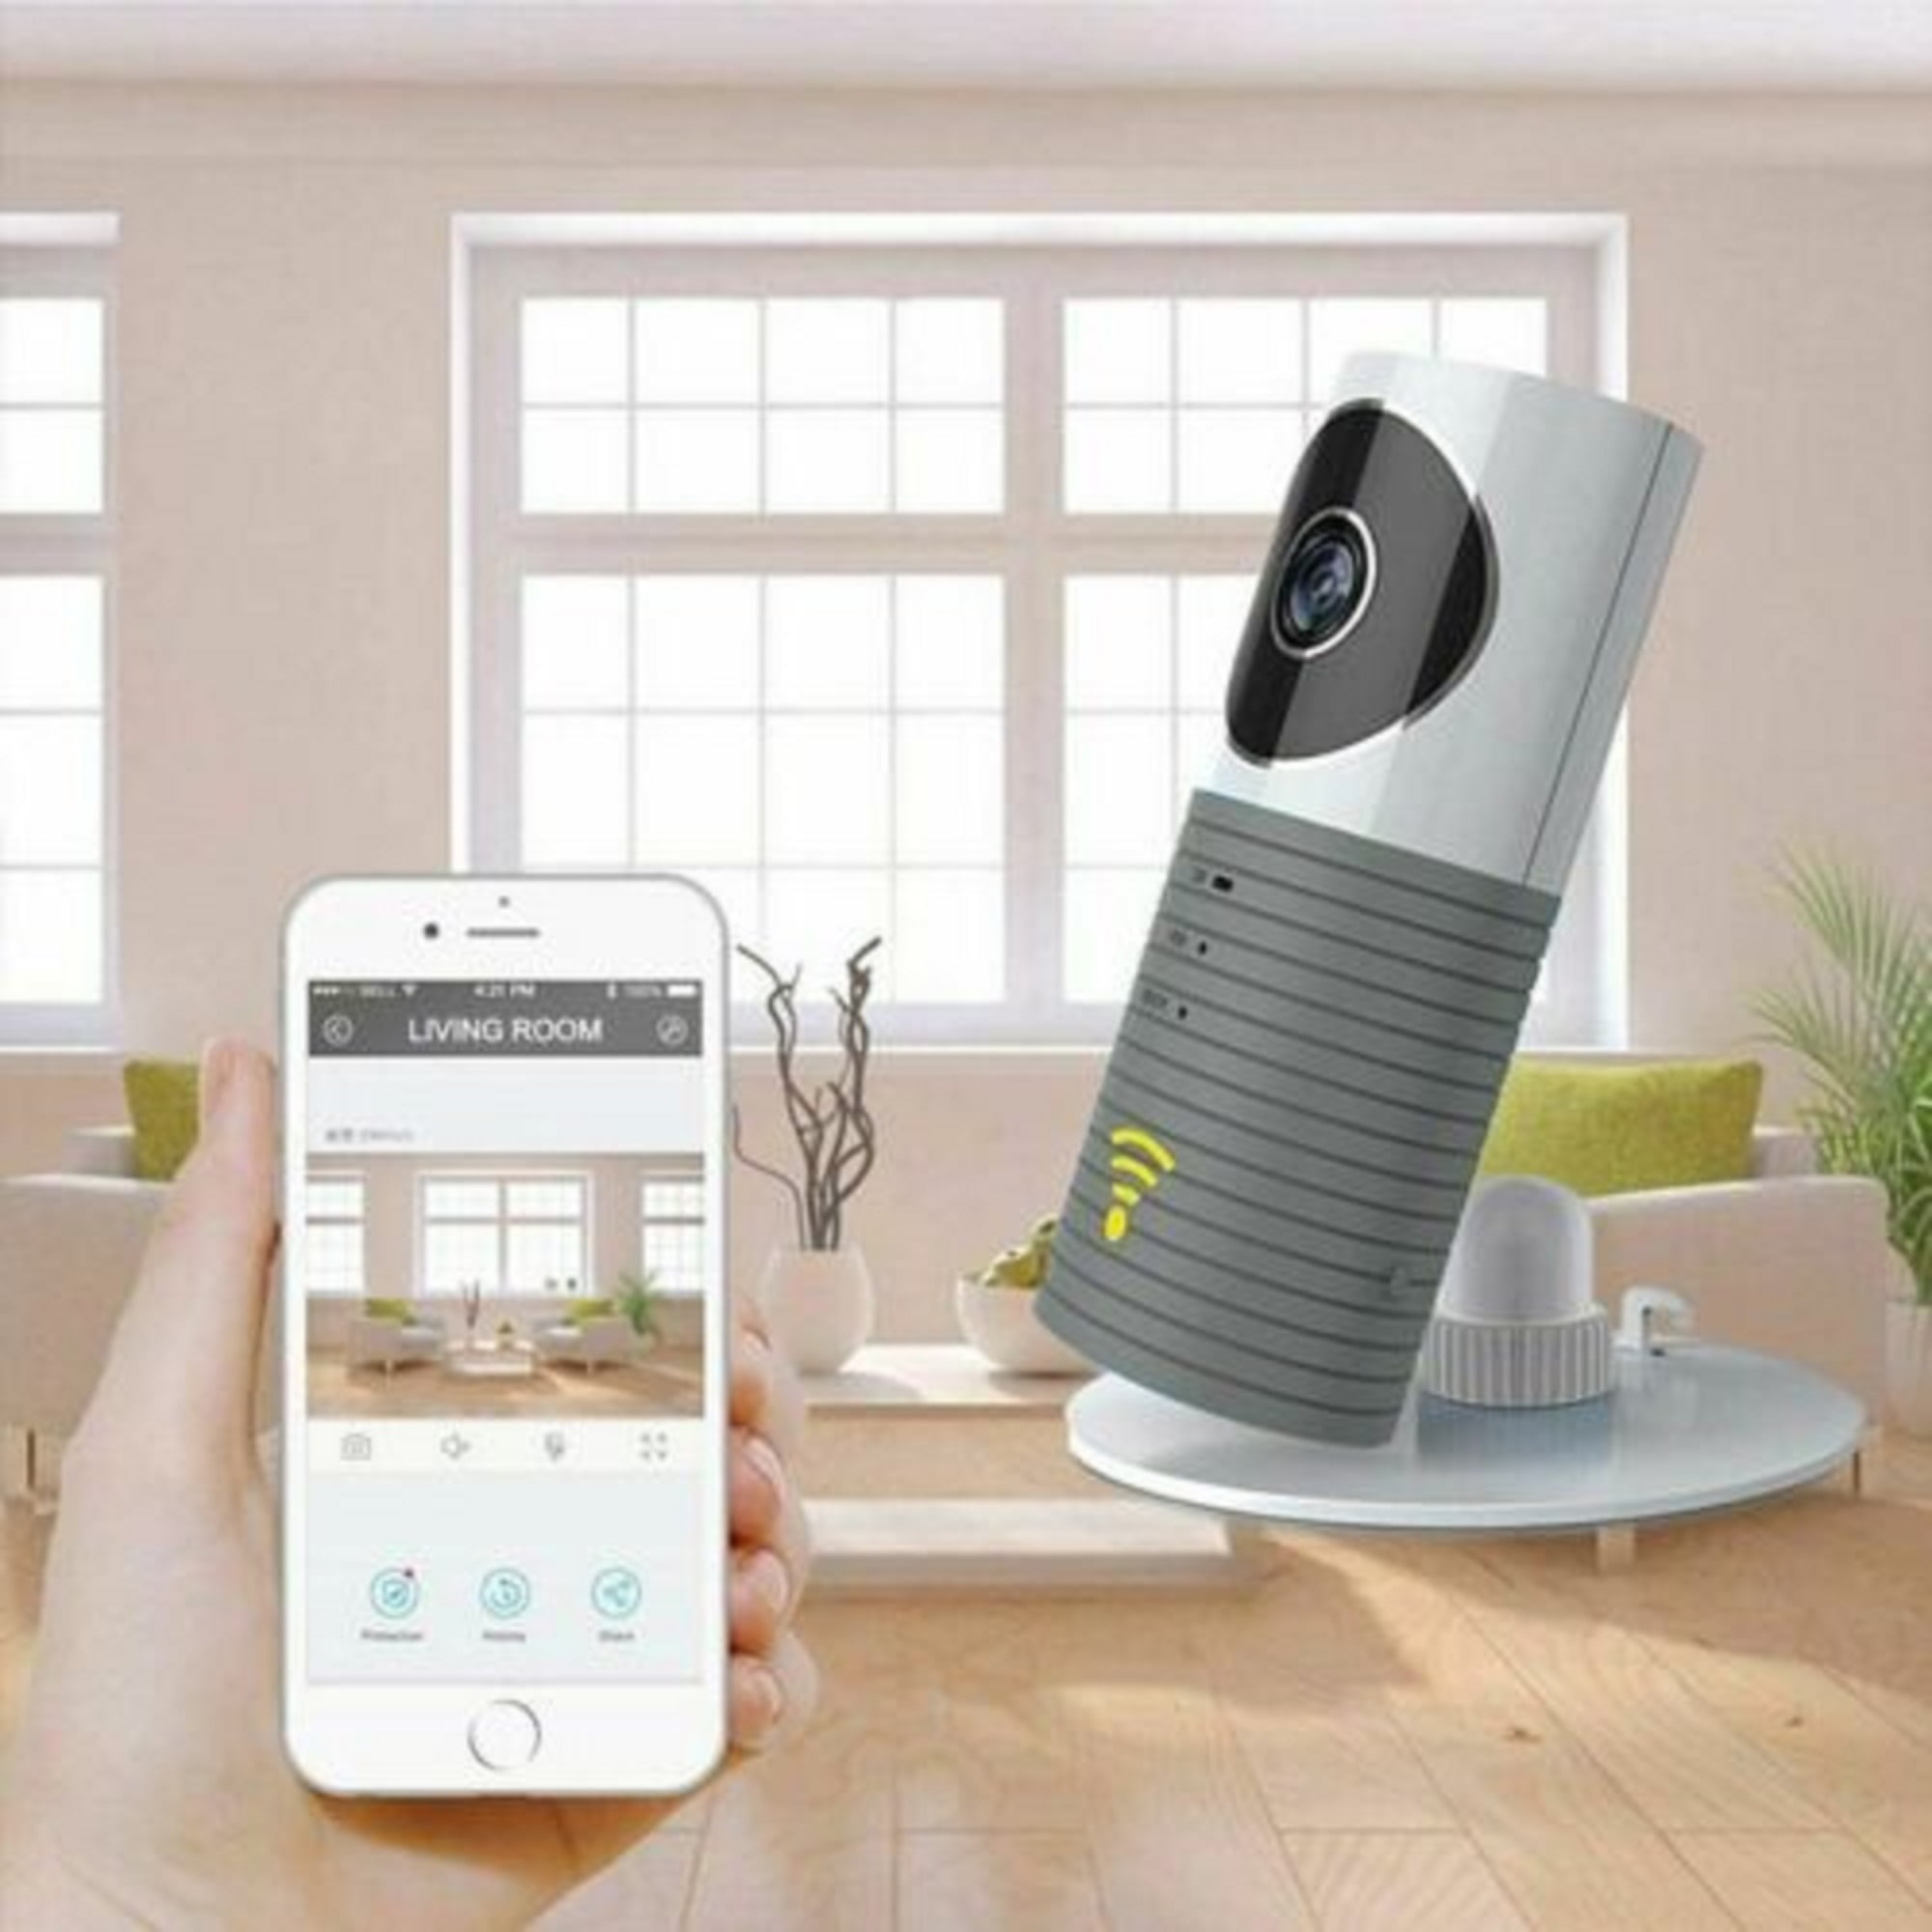 720P WiFi IP Camera Home Security Baby Monitor Clever Dog CCTV CAM Night Vision 